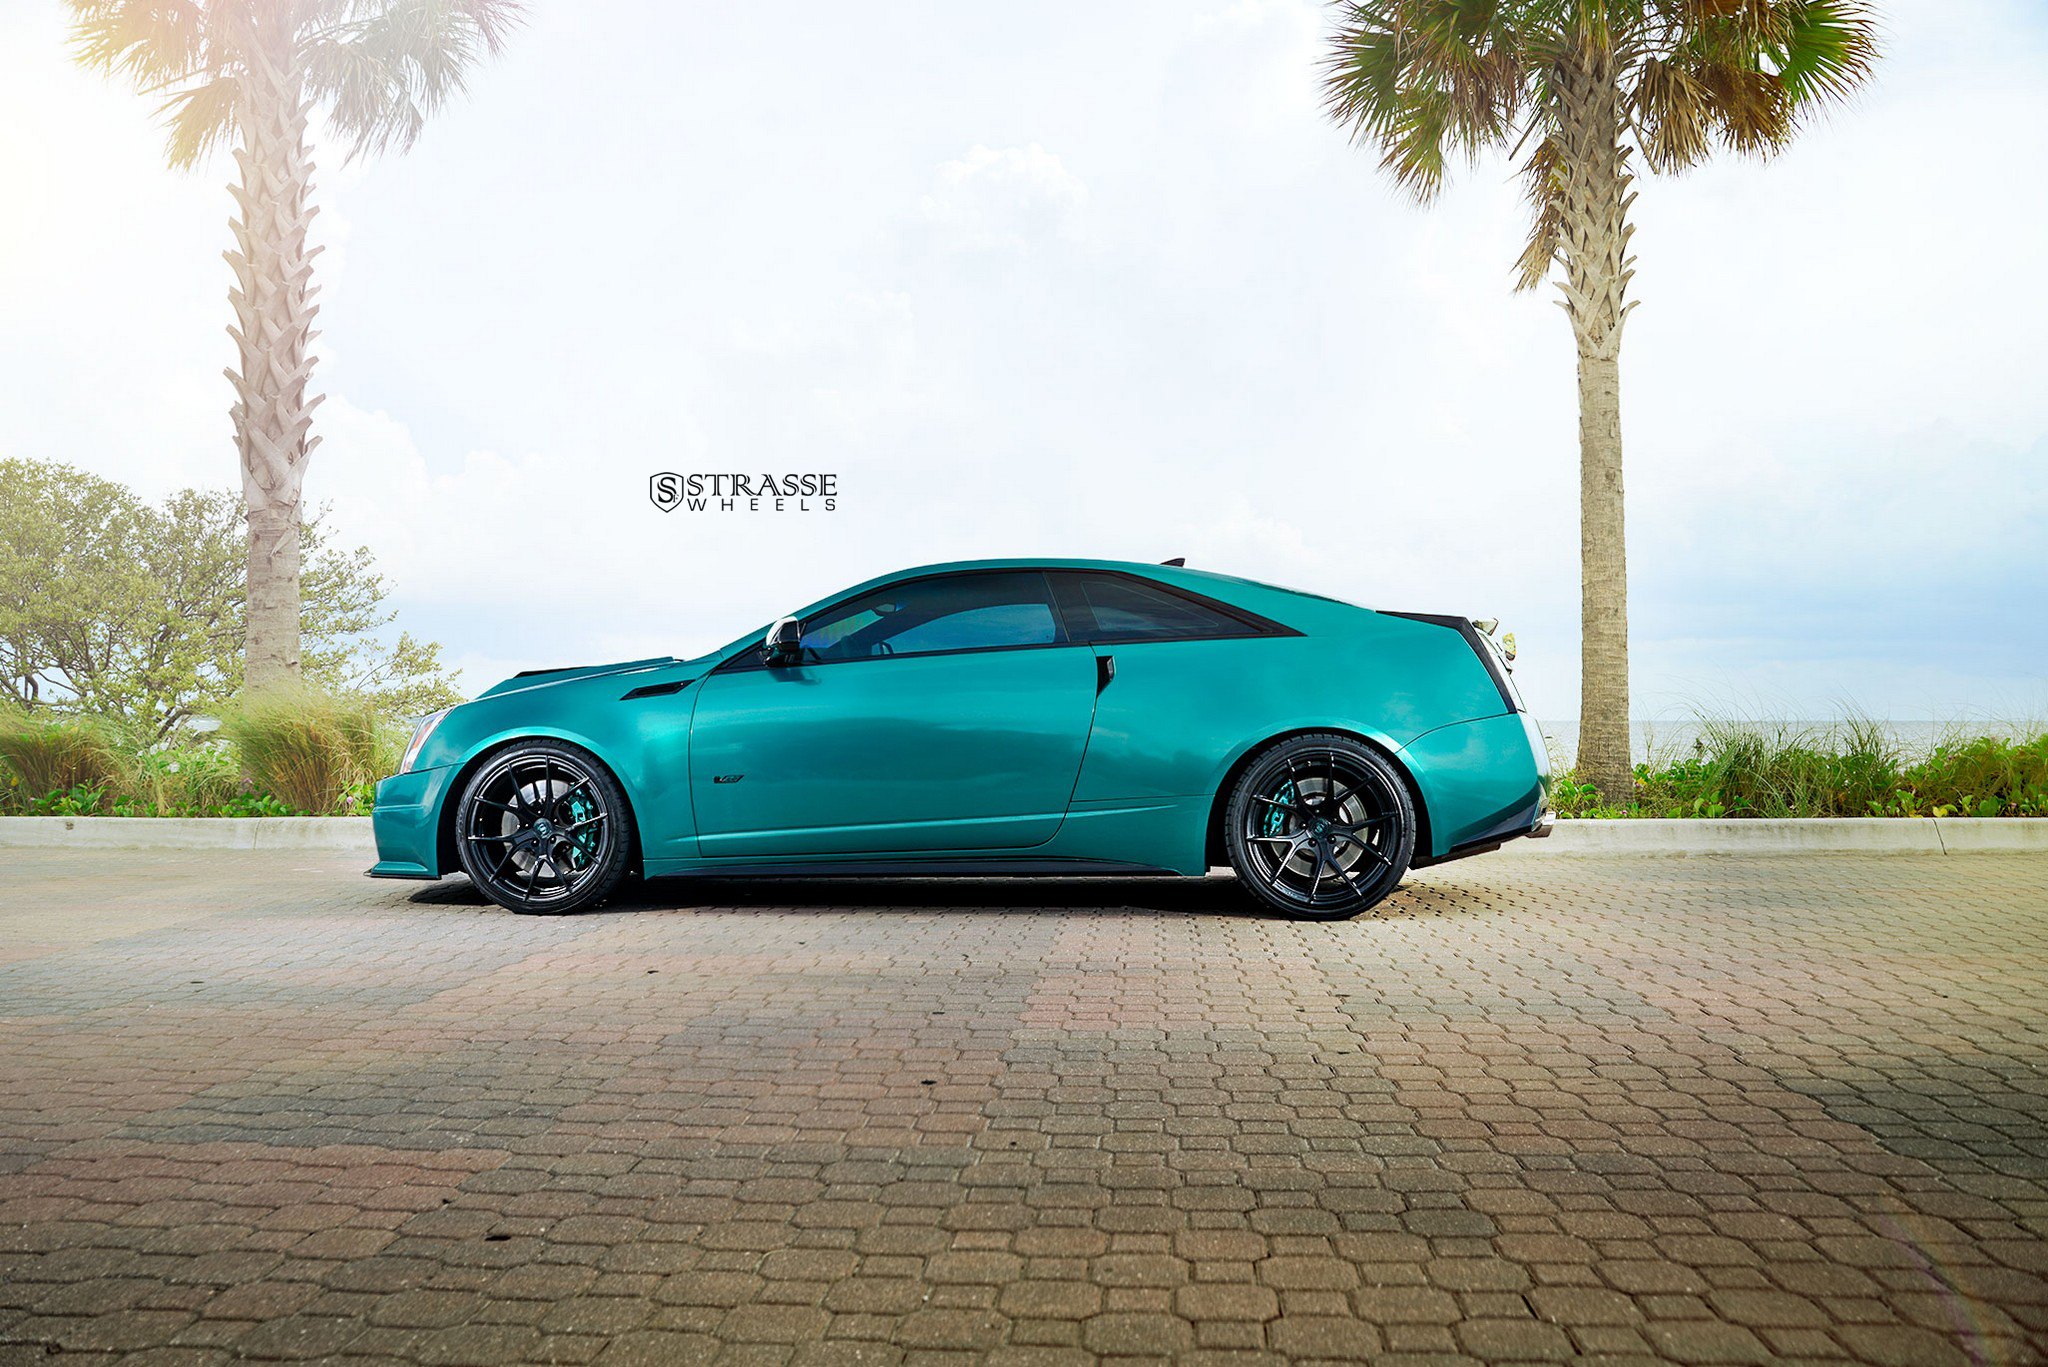 Aftermarket Side Skirts on Green Cadillac CTS - Photo by Strasse Forged